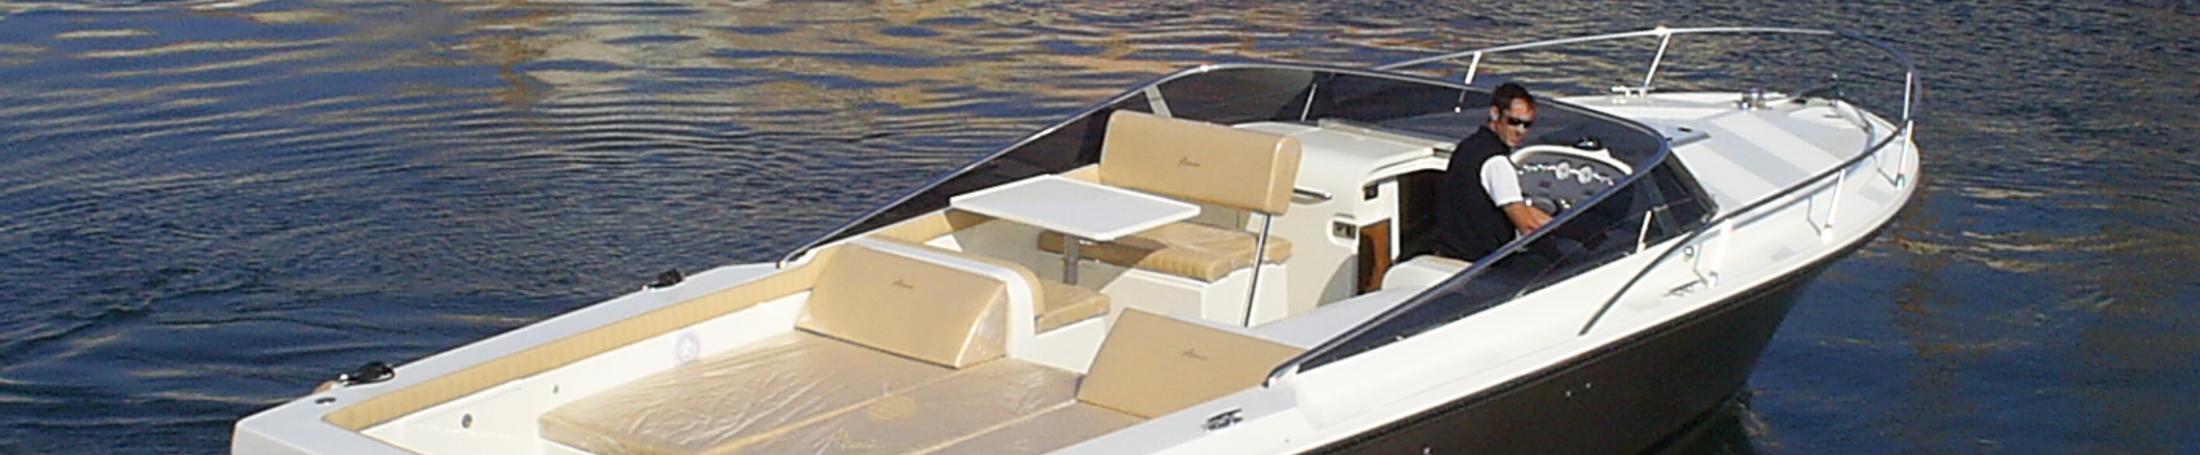 ASTERIE 35' DAY CRUISER